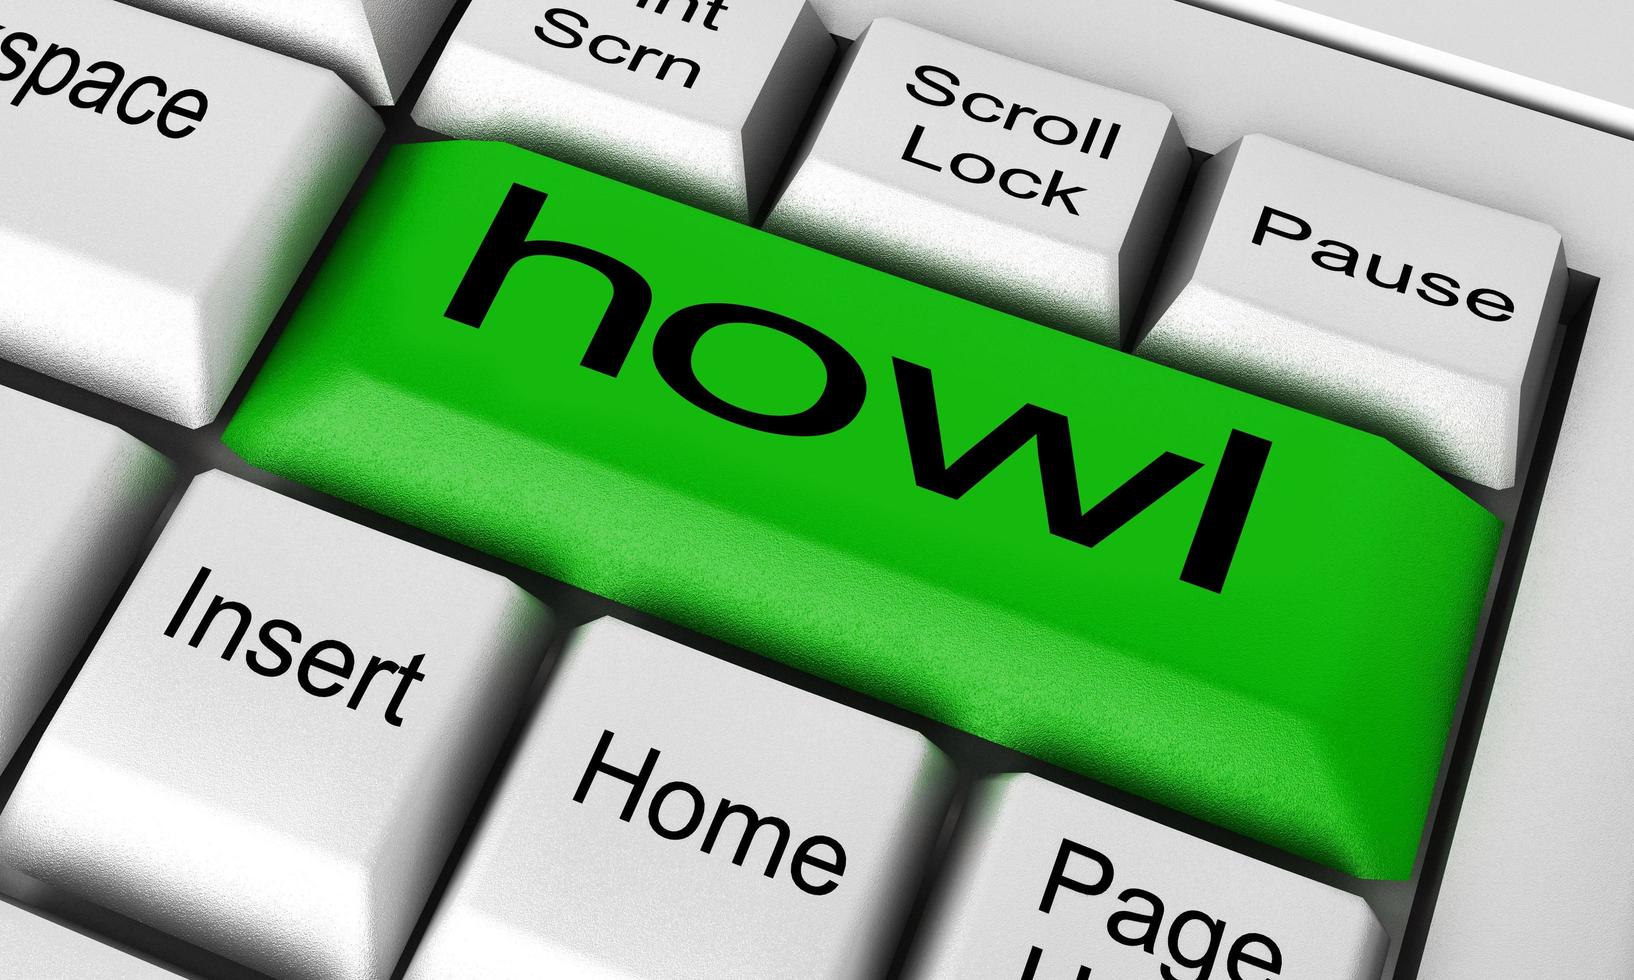 howl word on keyboard button photo